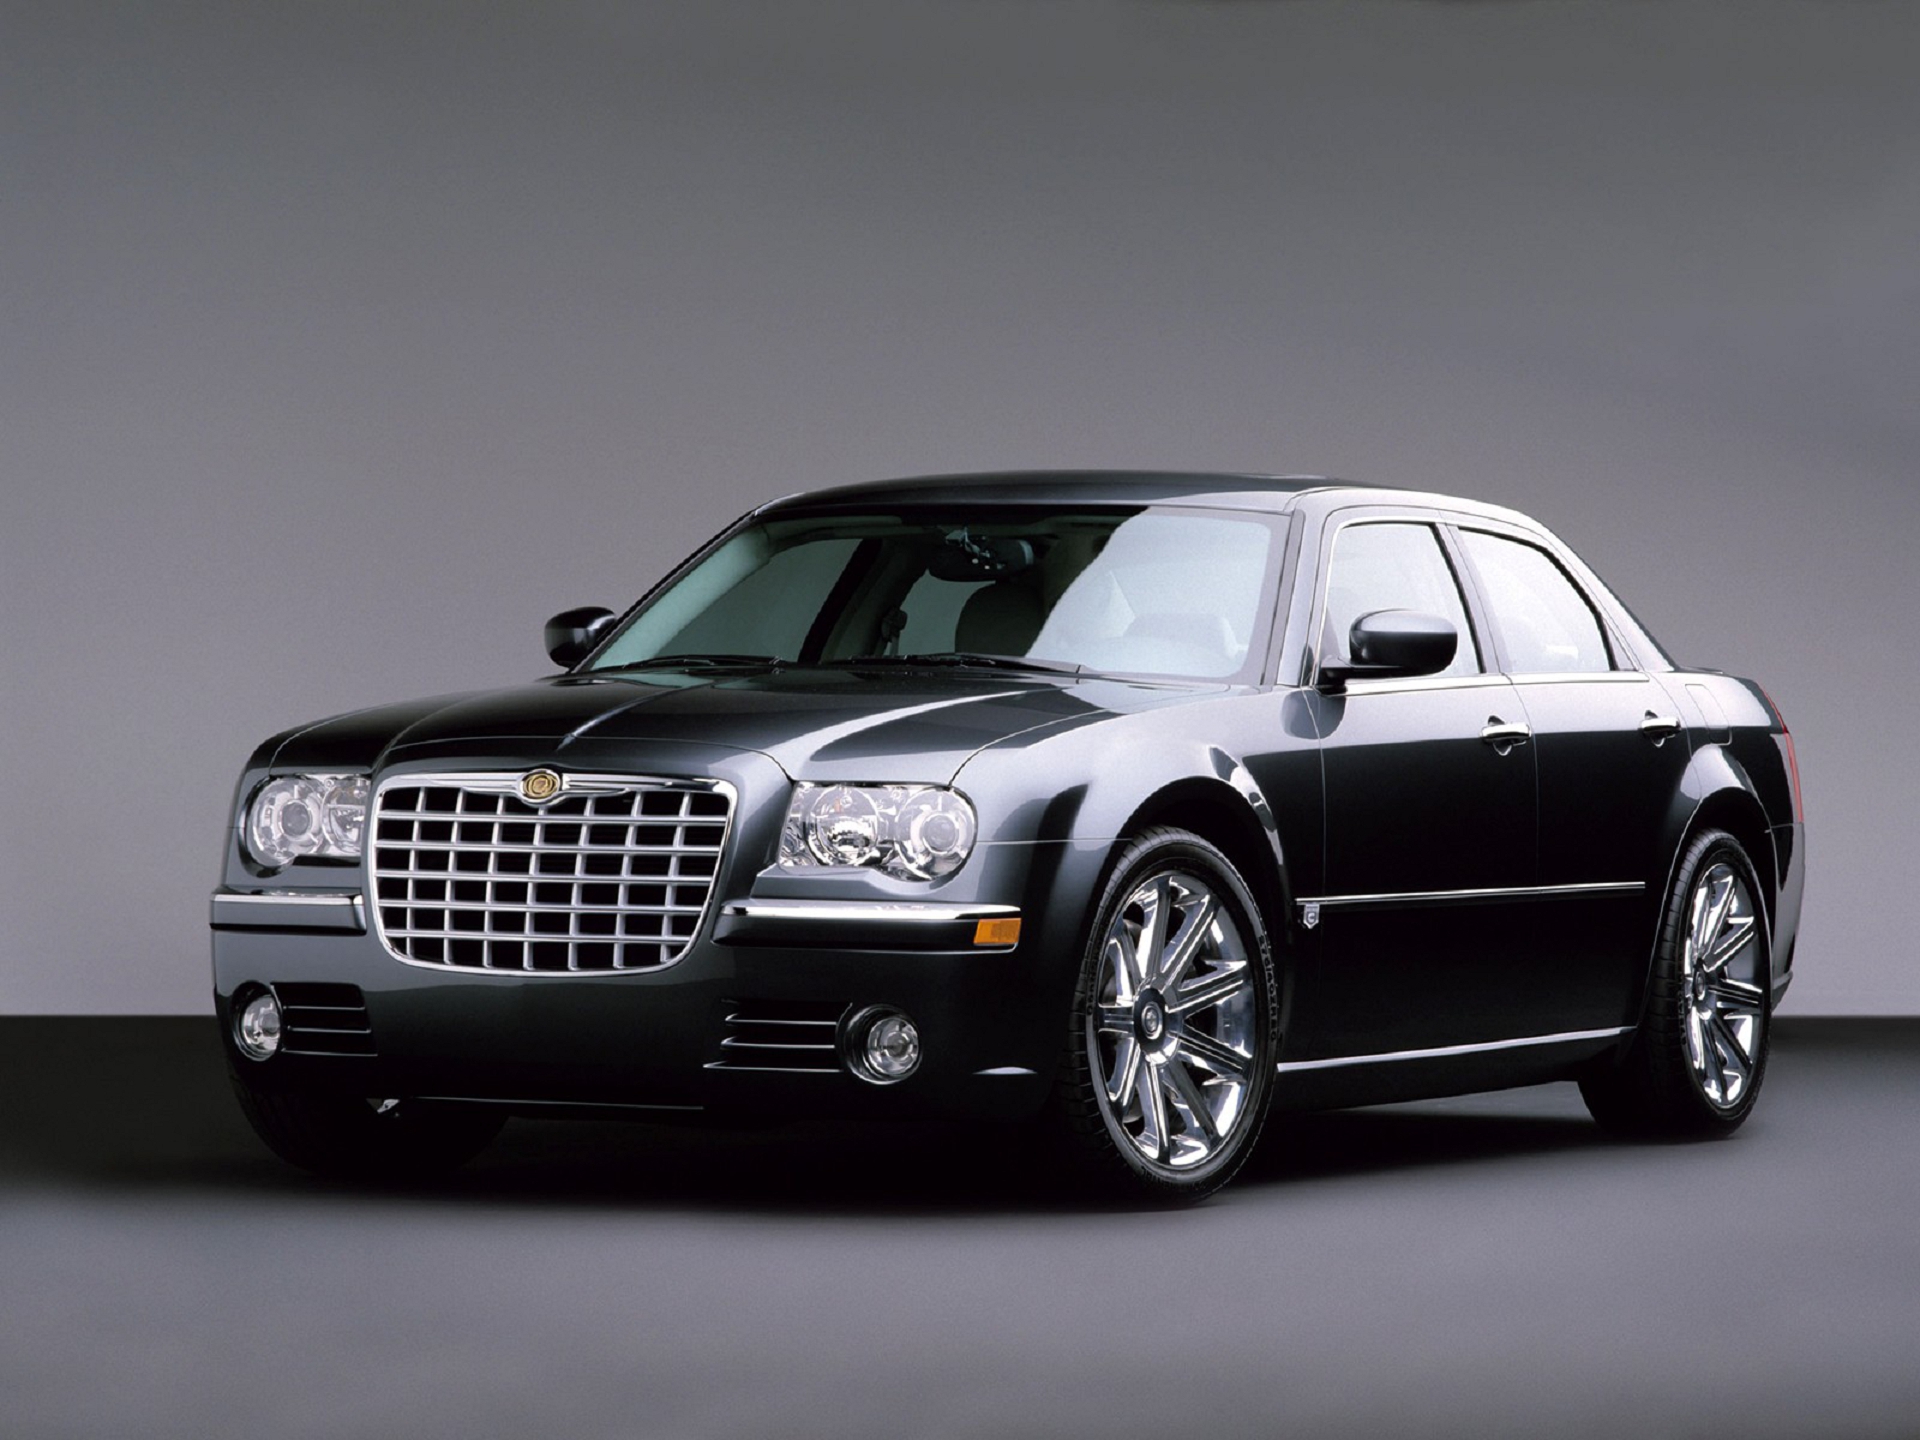 Chrysler High Definition Wallpapers